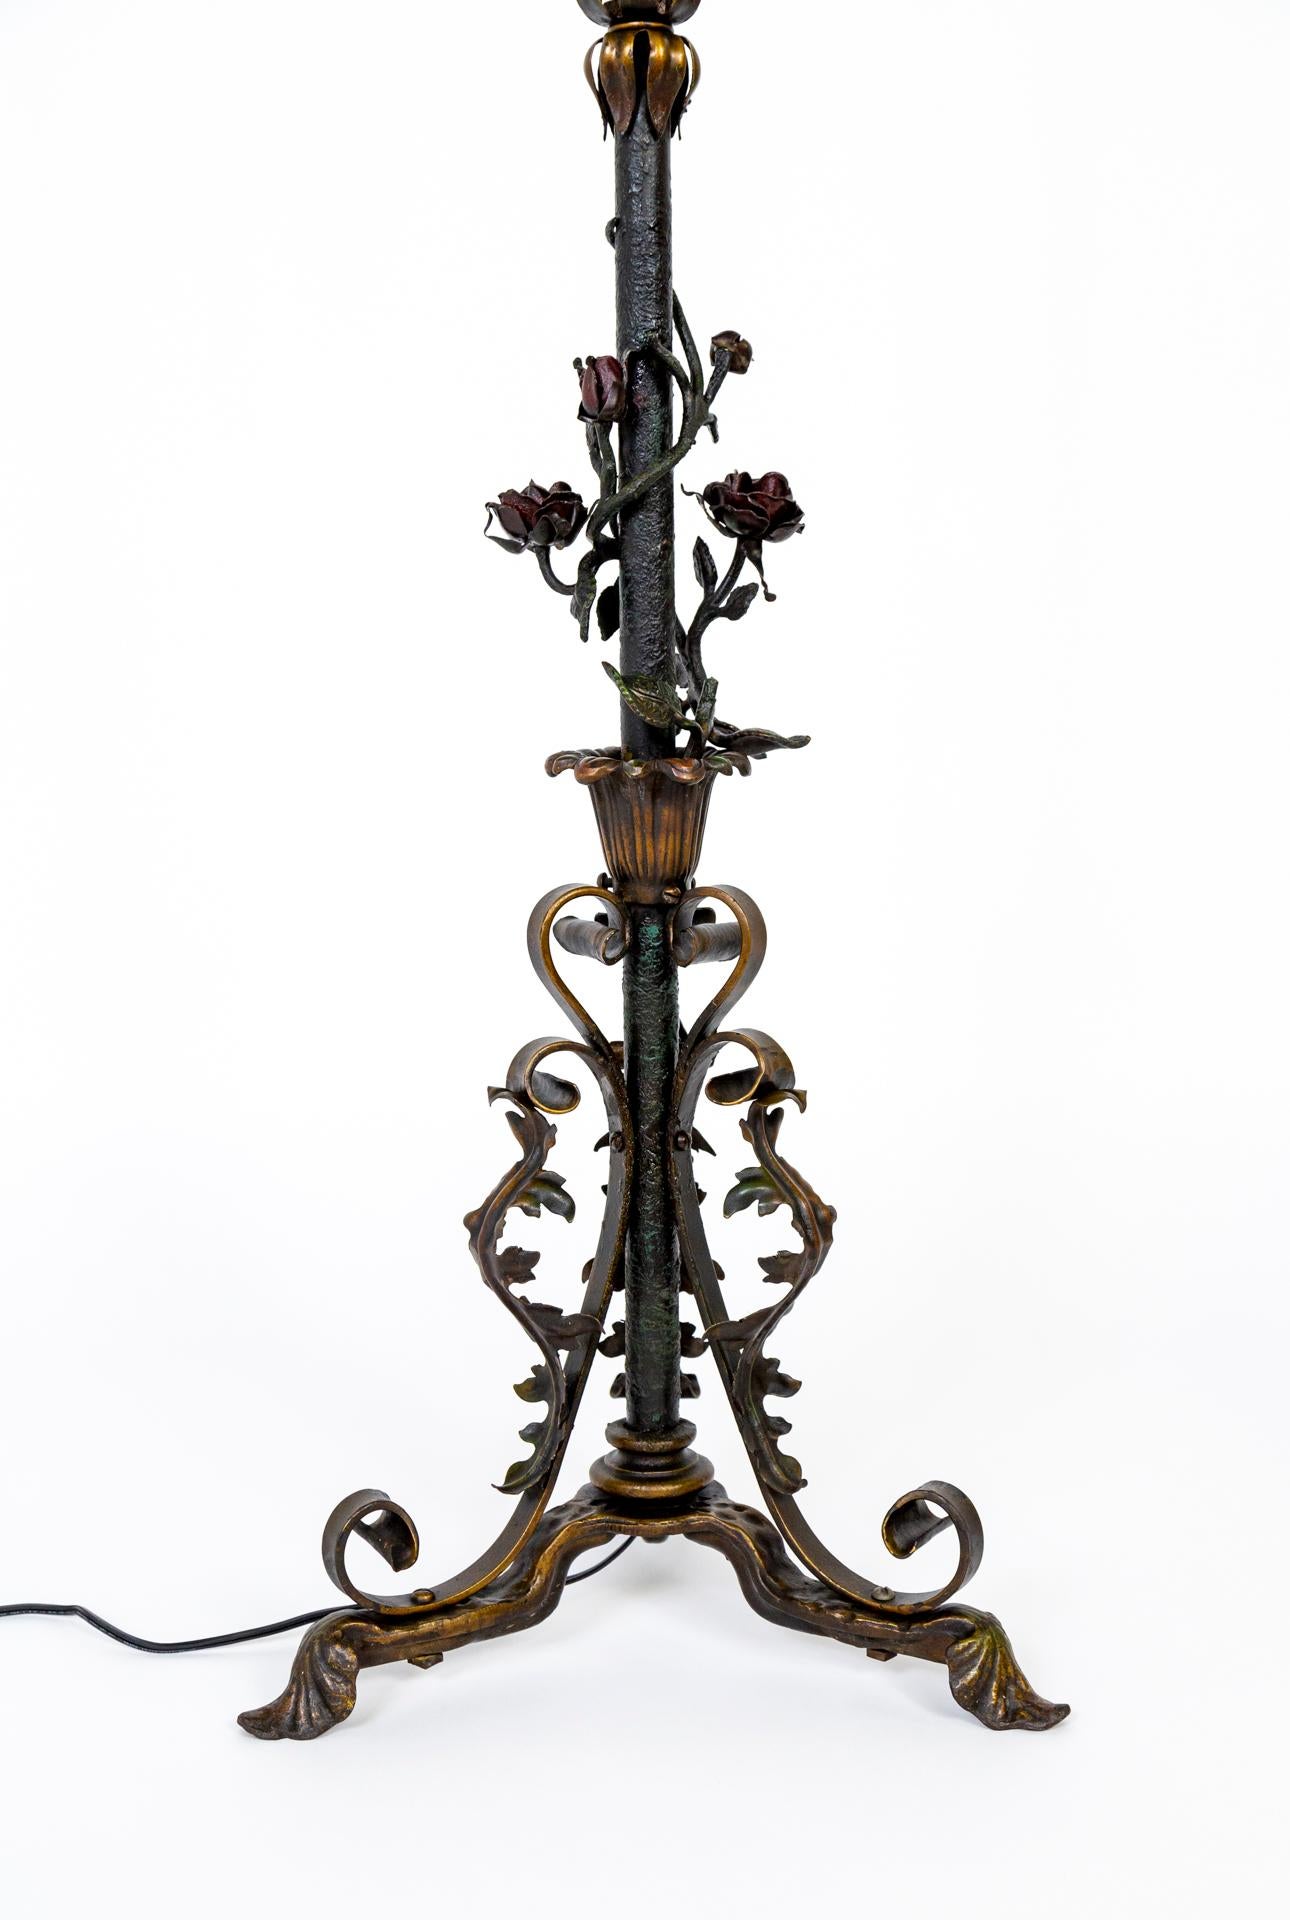 A late 19th century, ornate, black, iron floor lamp with three feet narrowing into a stem adorned with roses, leaves, and scrolls; subtly tinted in red, bronze, and green. The design elements are cast and forged with precision and detail. The stem